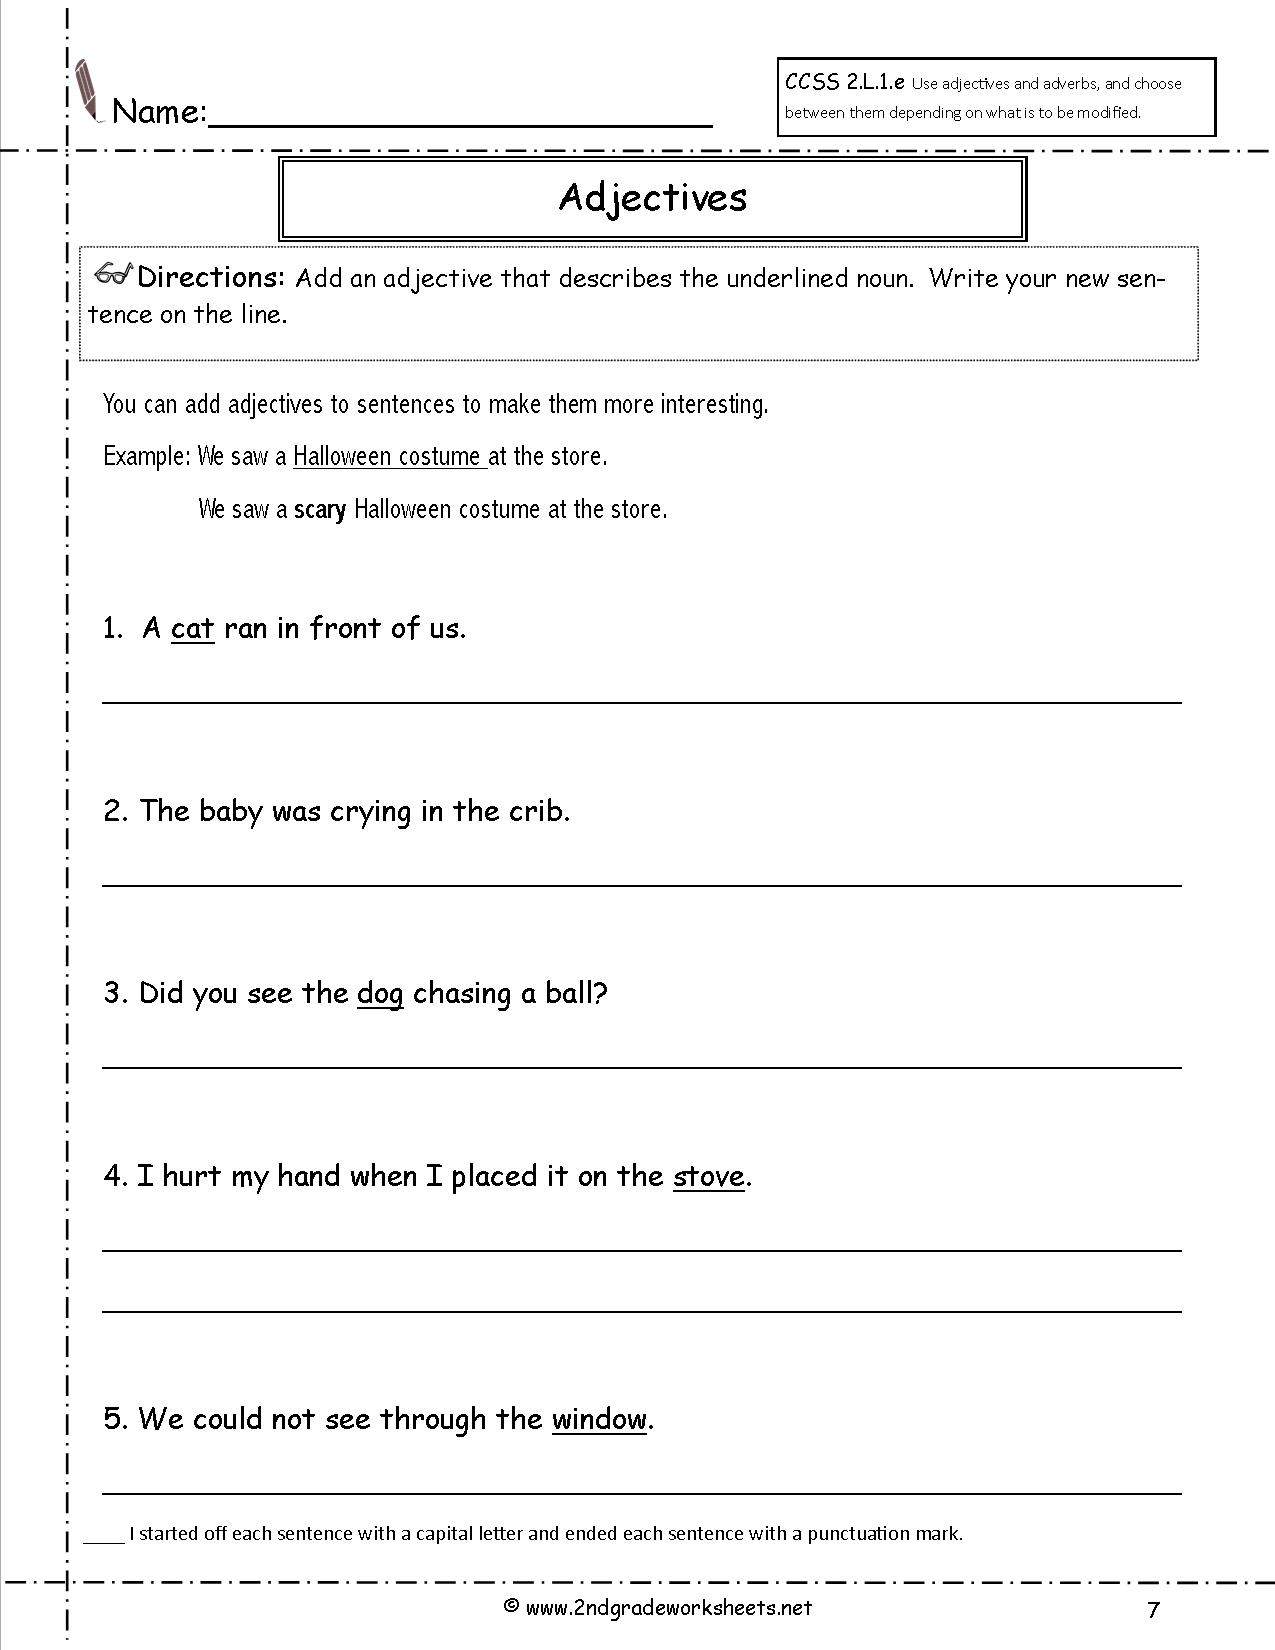 what-is-an-adjective-worksheets-99worksheets